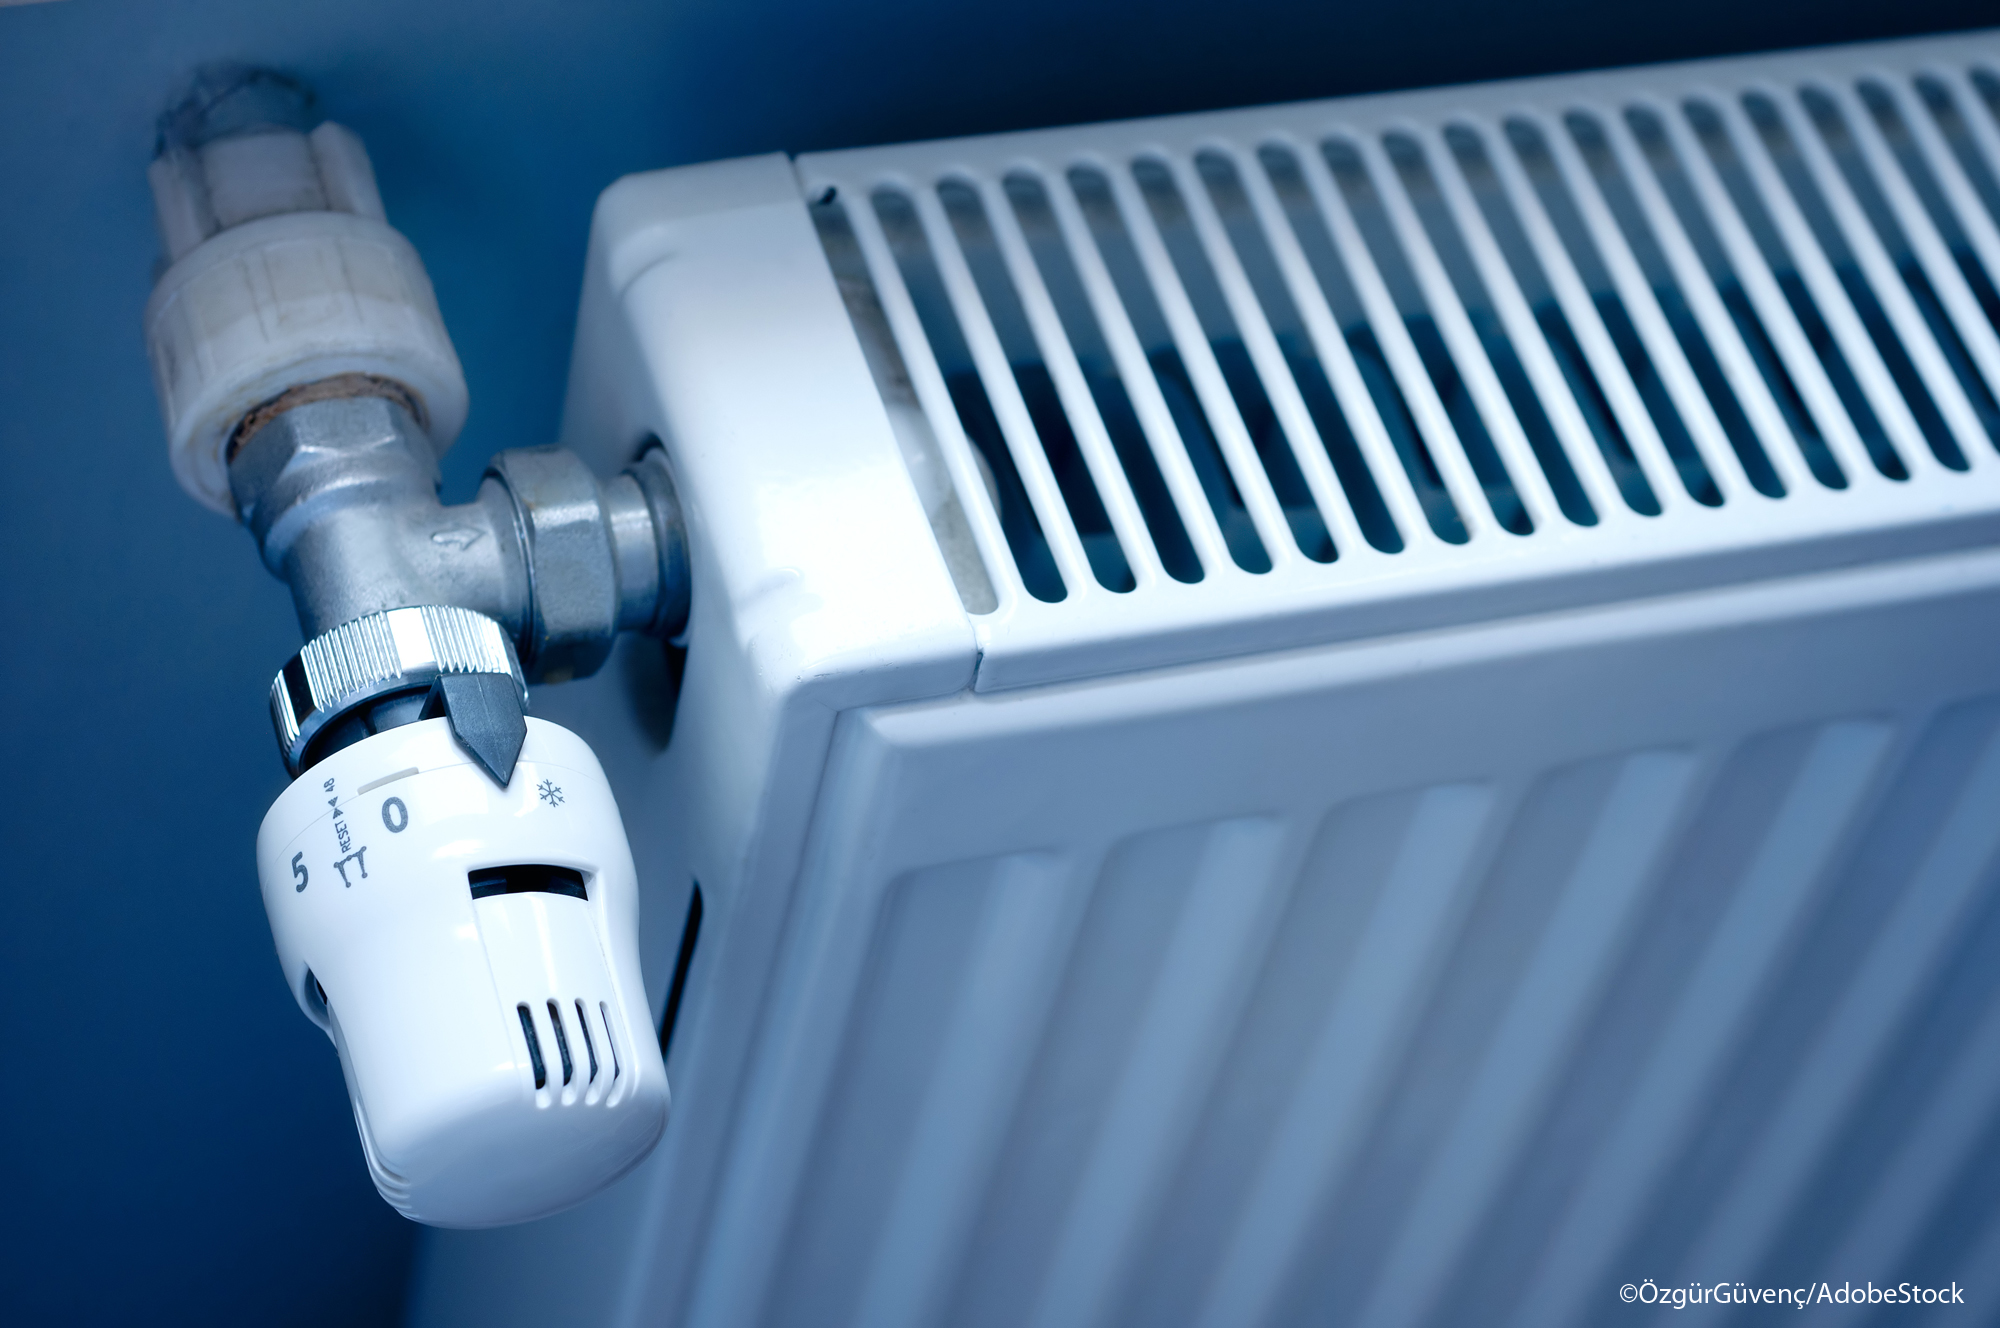 Funding for fuel poverty and energy efficiency in Scotland